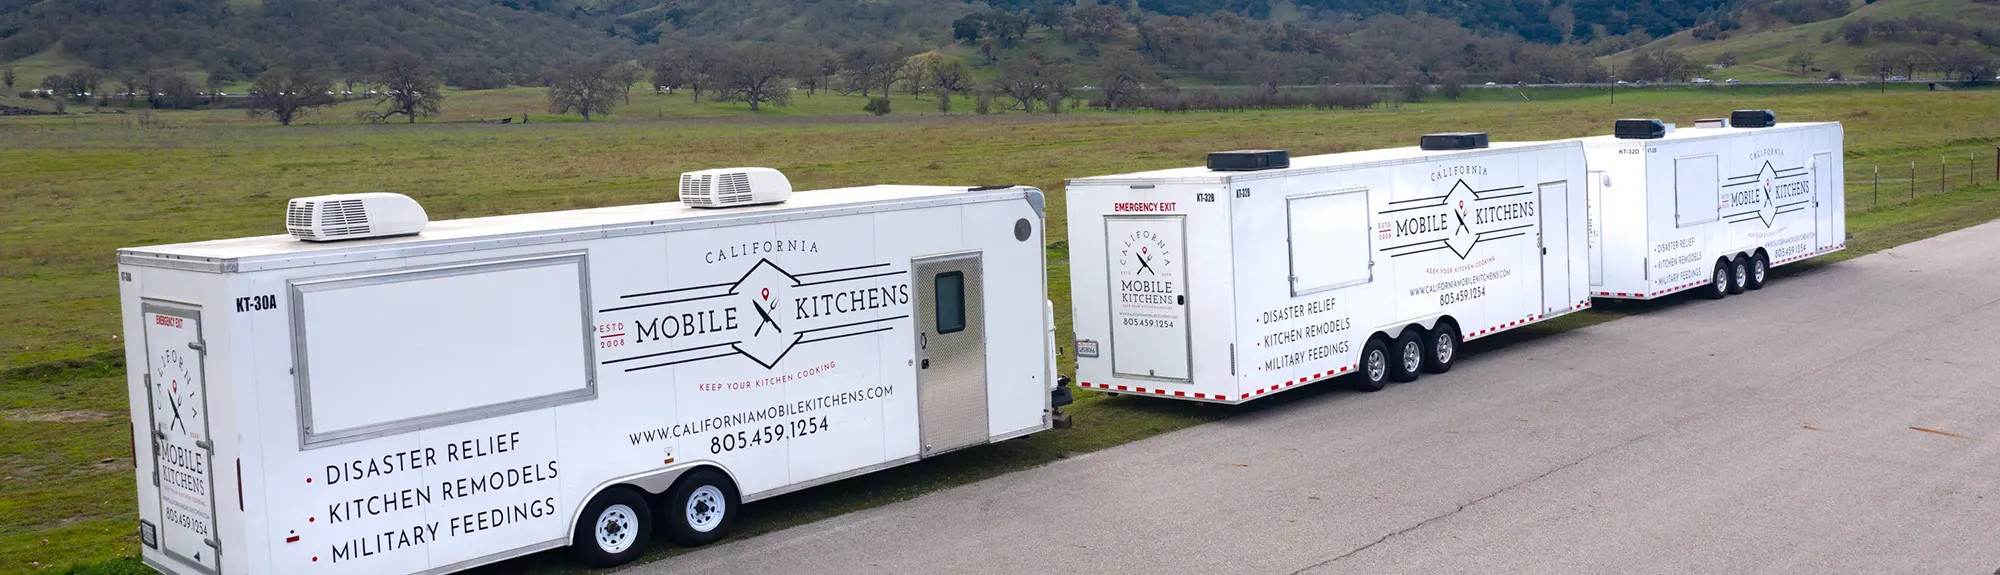 Emergency Response Supported By Mobile Kitchens In Illinois